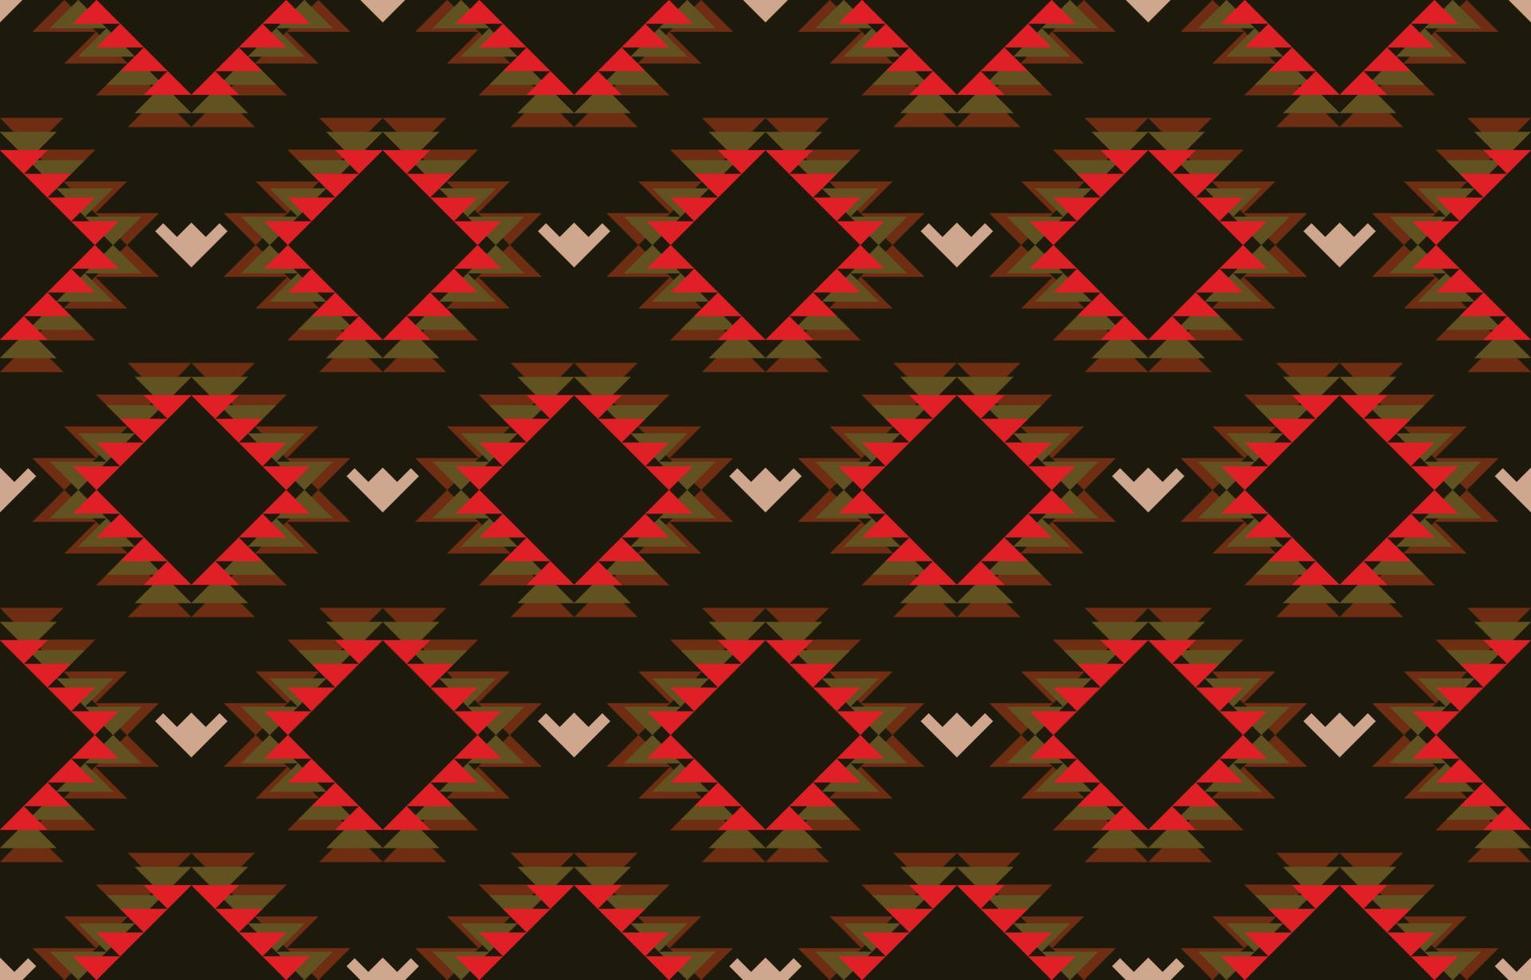 Abstract american ethnic geometric pattern design for background or wallpaper. fabric pattern vector illustration